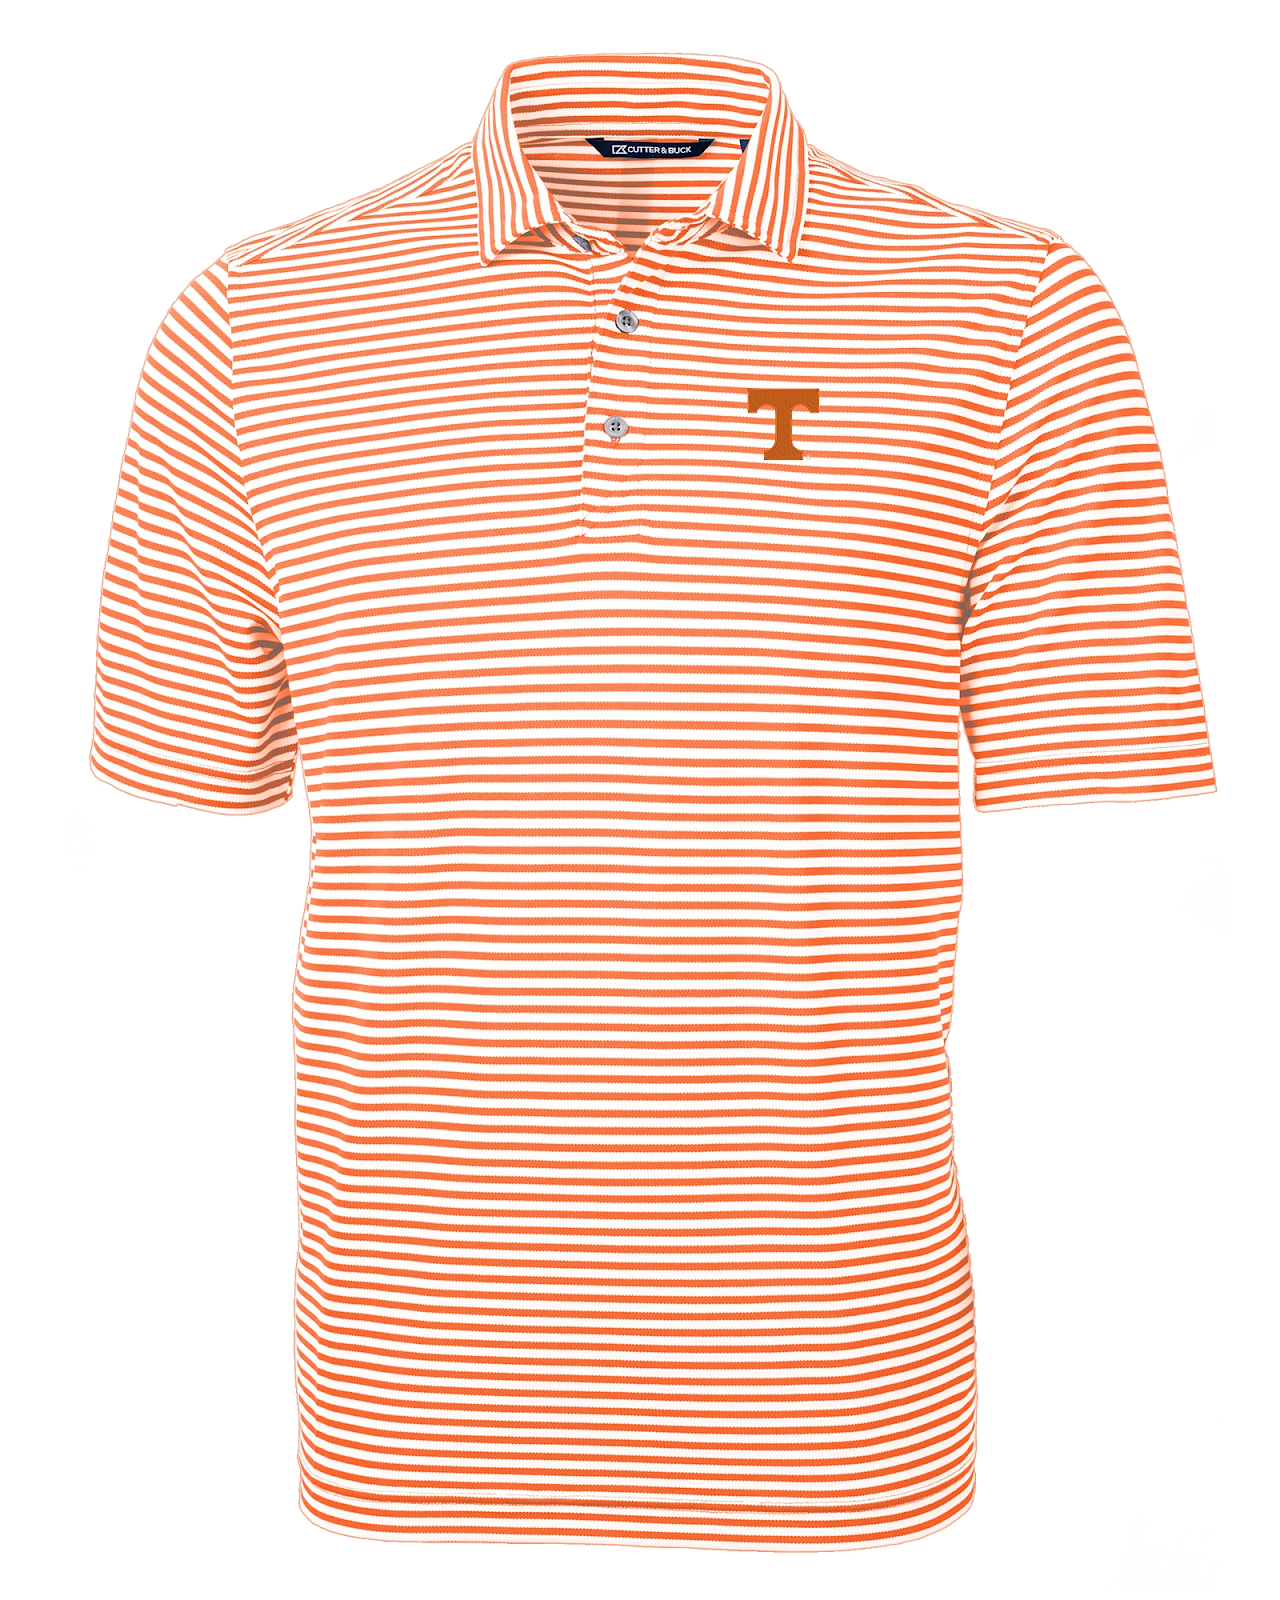 Breathable striped Tennesse Volunteers men's polo